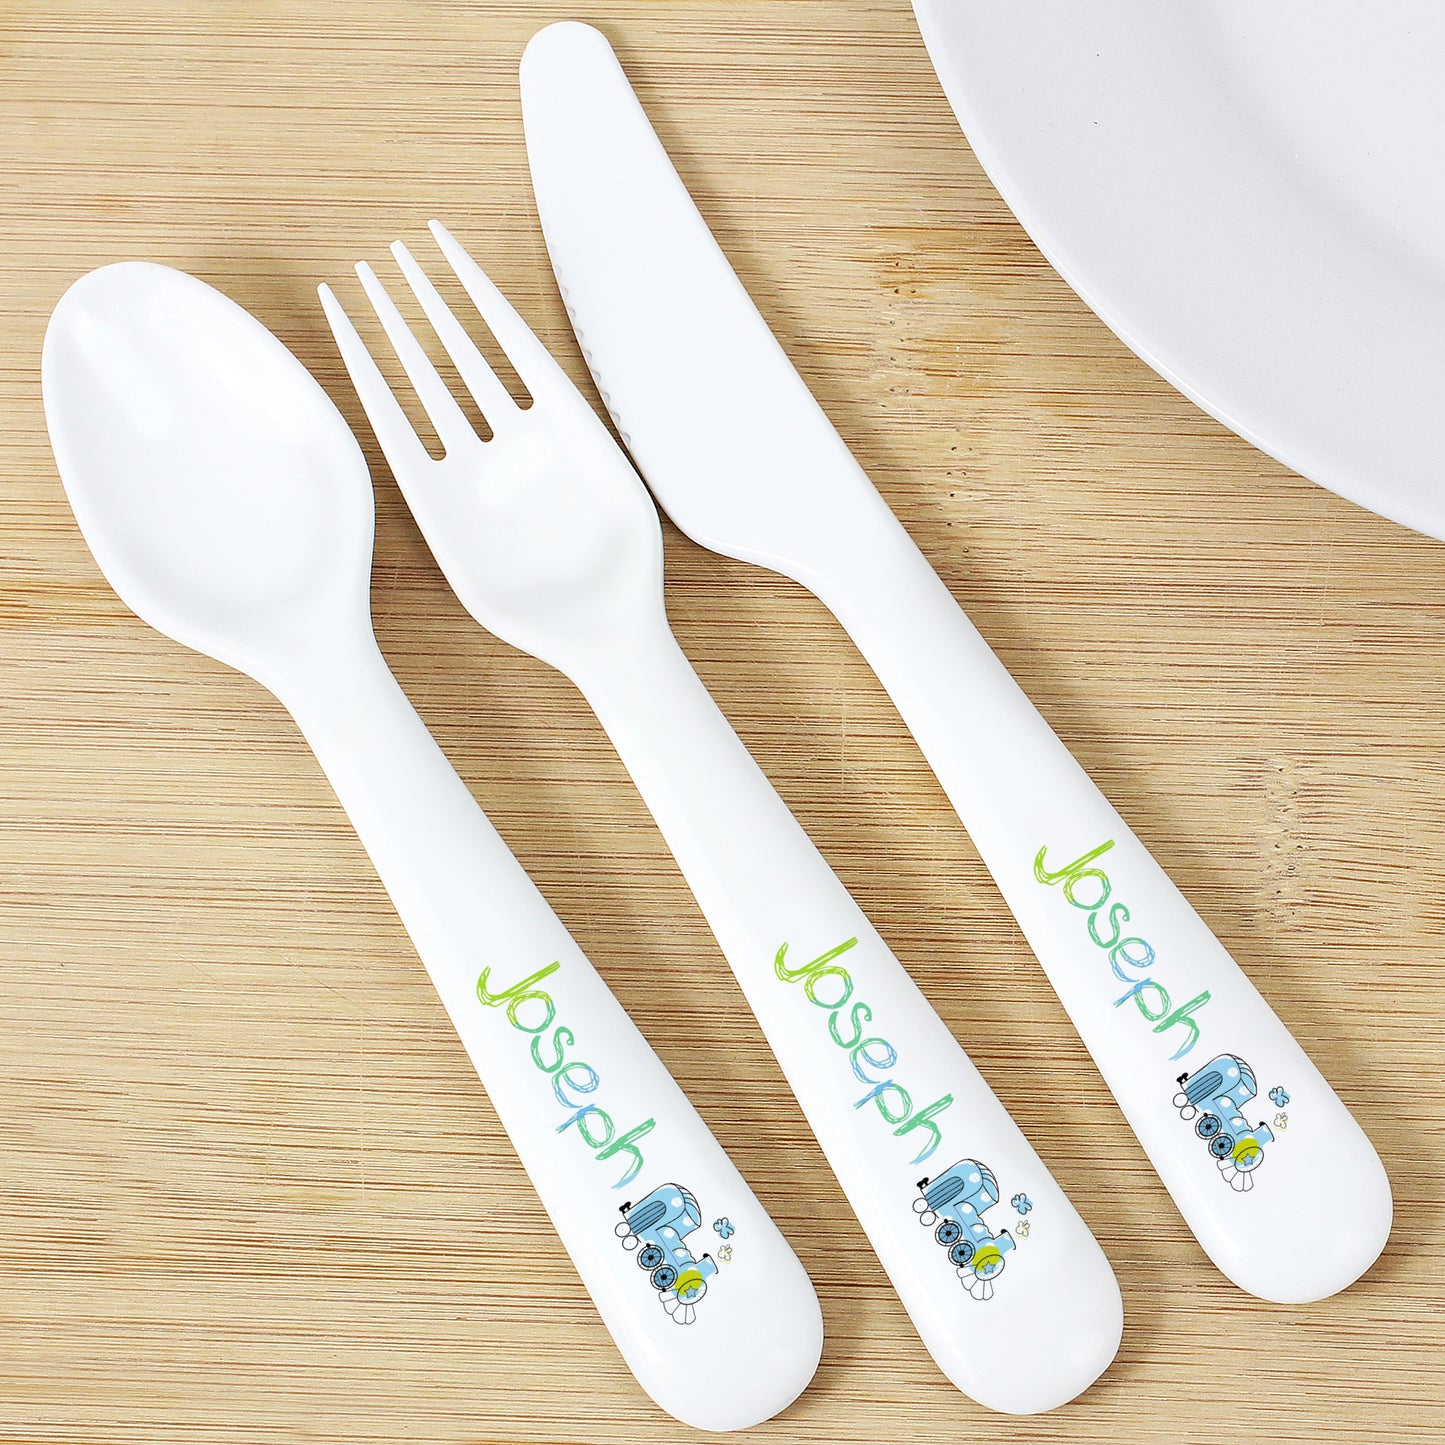 Personalised Patchwork Train 3 Piece Plastic Cutlery Set - Personalise It!